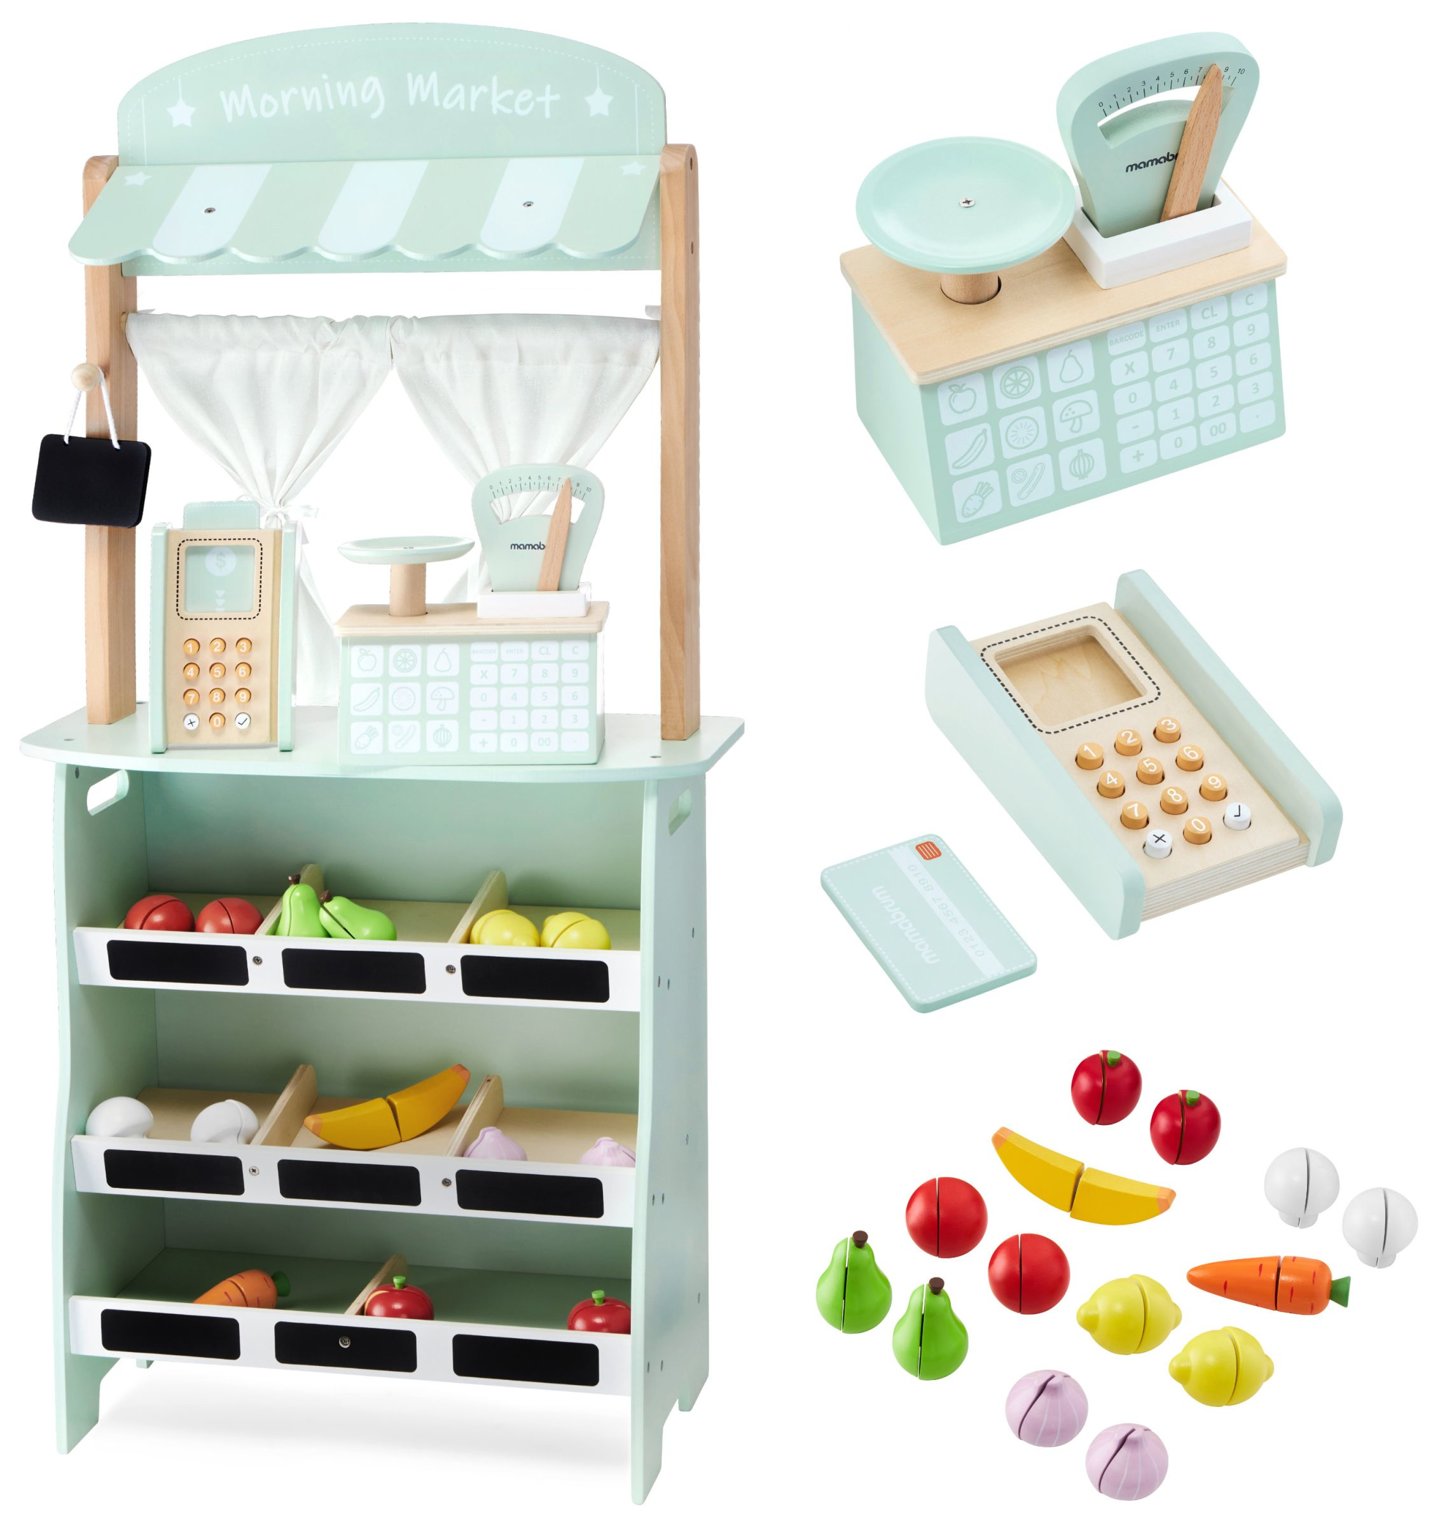 Large wooden shop - stall and theater 2 in 1 with scale, payment terminal, fruit and vegetables